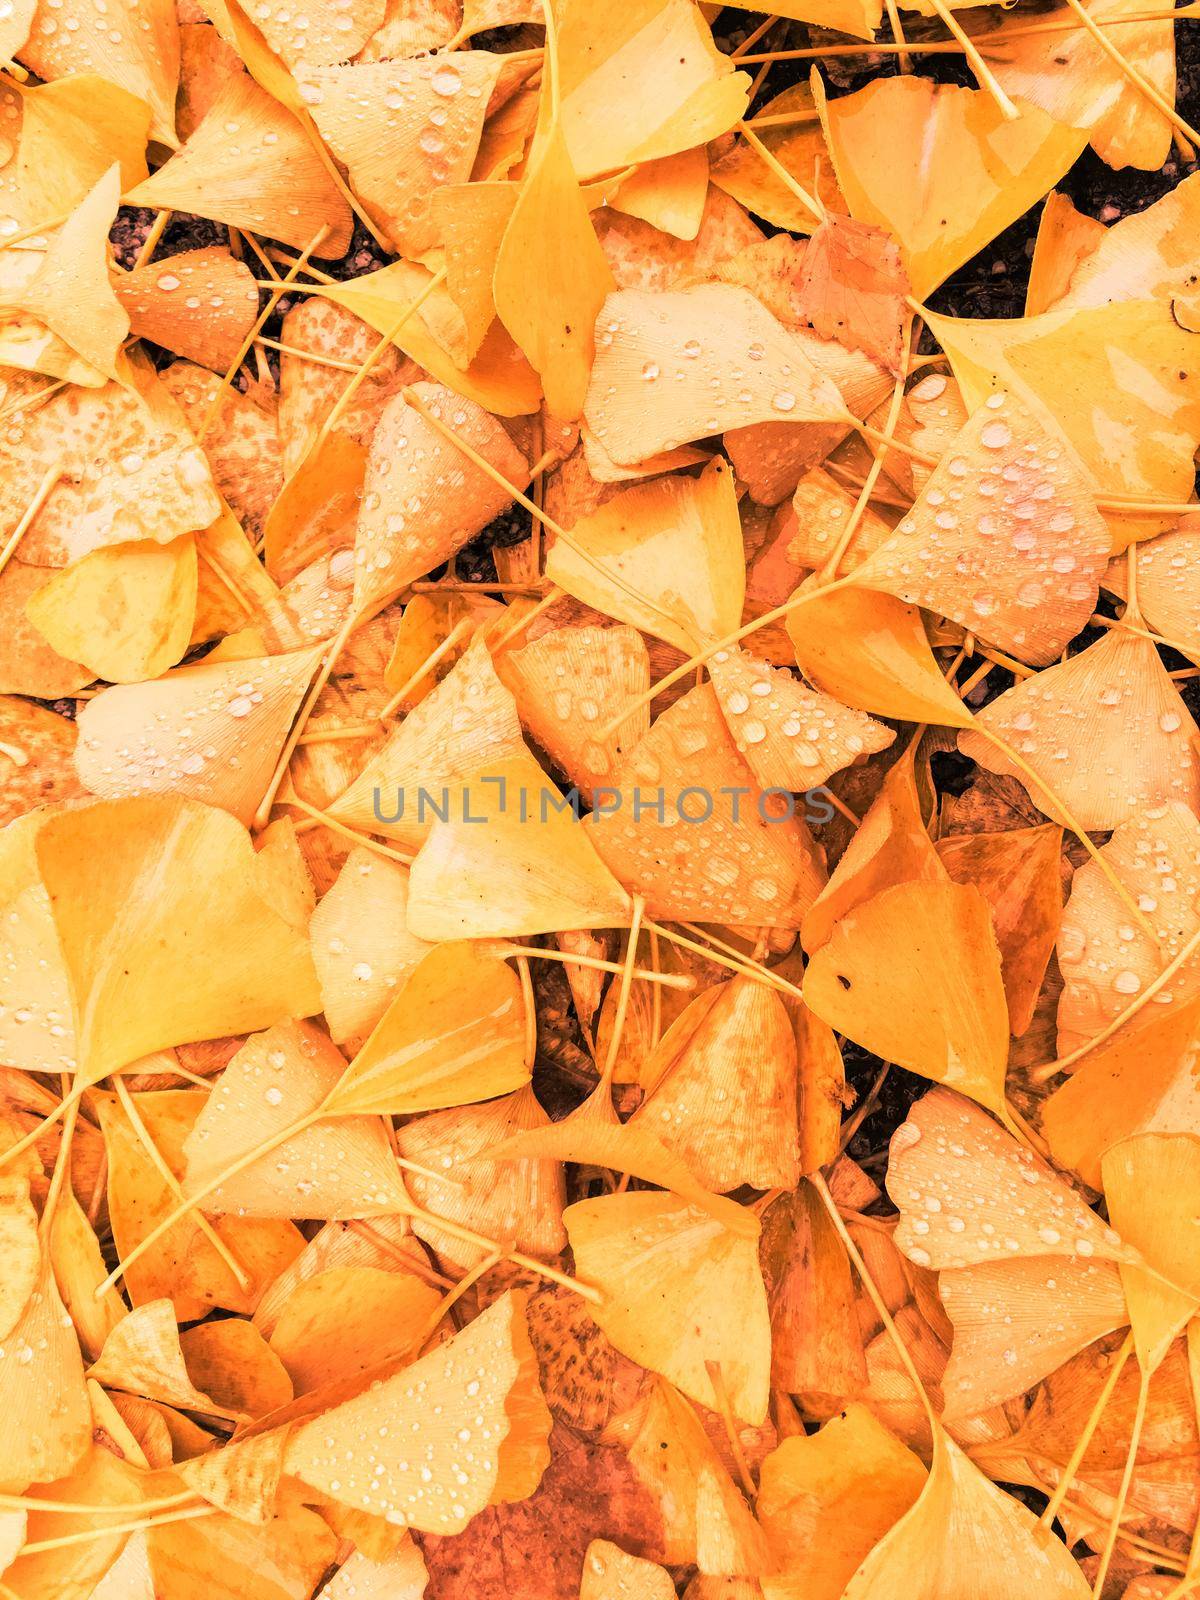 Autumn leaves and trees, nature background by Anneleven